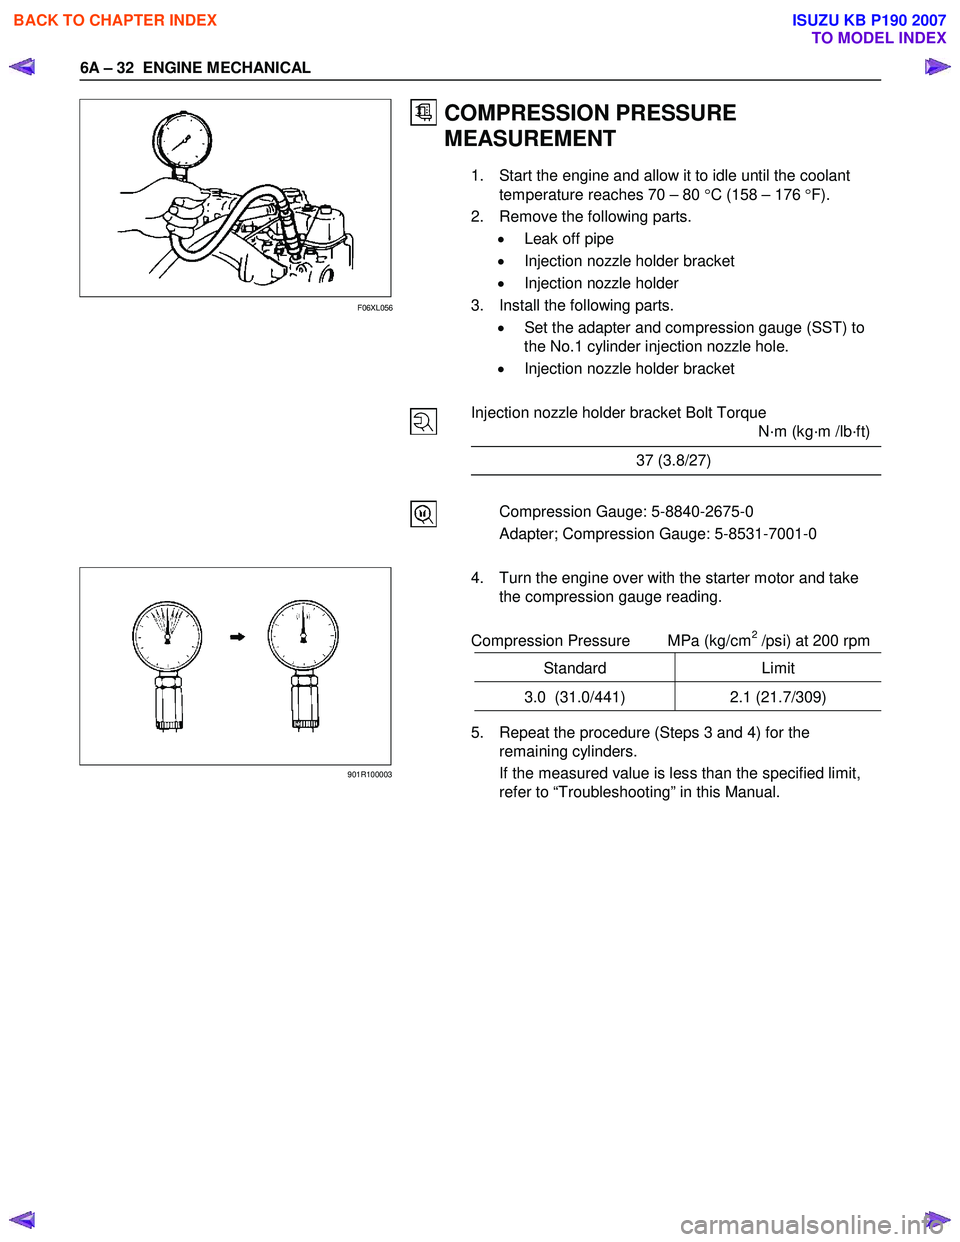 ISUZU KB P190 2007  Workshop User Guide 6A – 32  ENGINE MECHANICAL 
 
 
  
 
 
 
 
 
 
 
 
 
 
 
 
 
 
 
 
 
 
 
 
 
 
 
 
 
 
 
 
 
 
 
 
 
 
 
 
  
 
COMPRESSION PRESSURE  
MEASUREMENT 
1.  Start the engine and allow it to idle until th